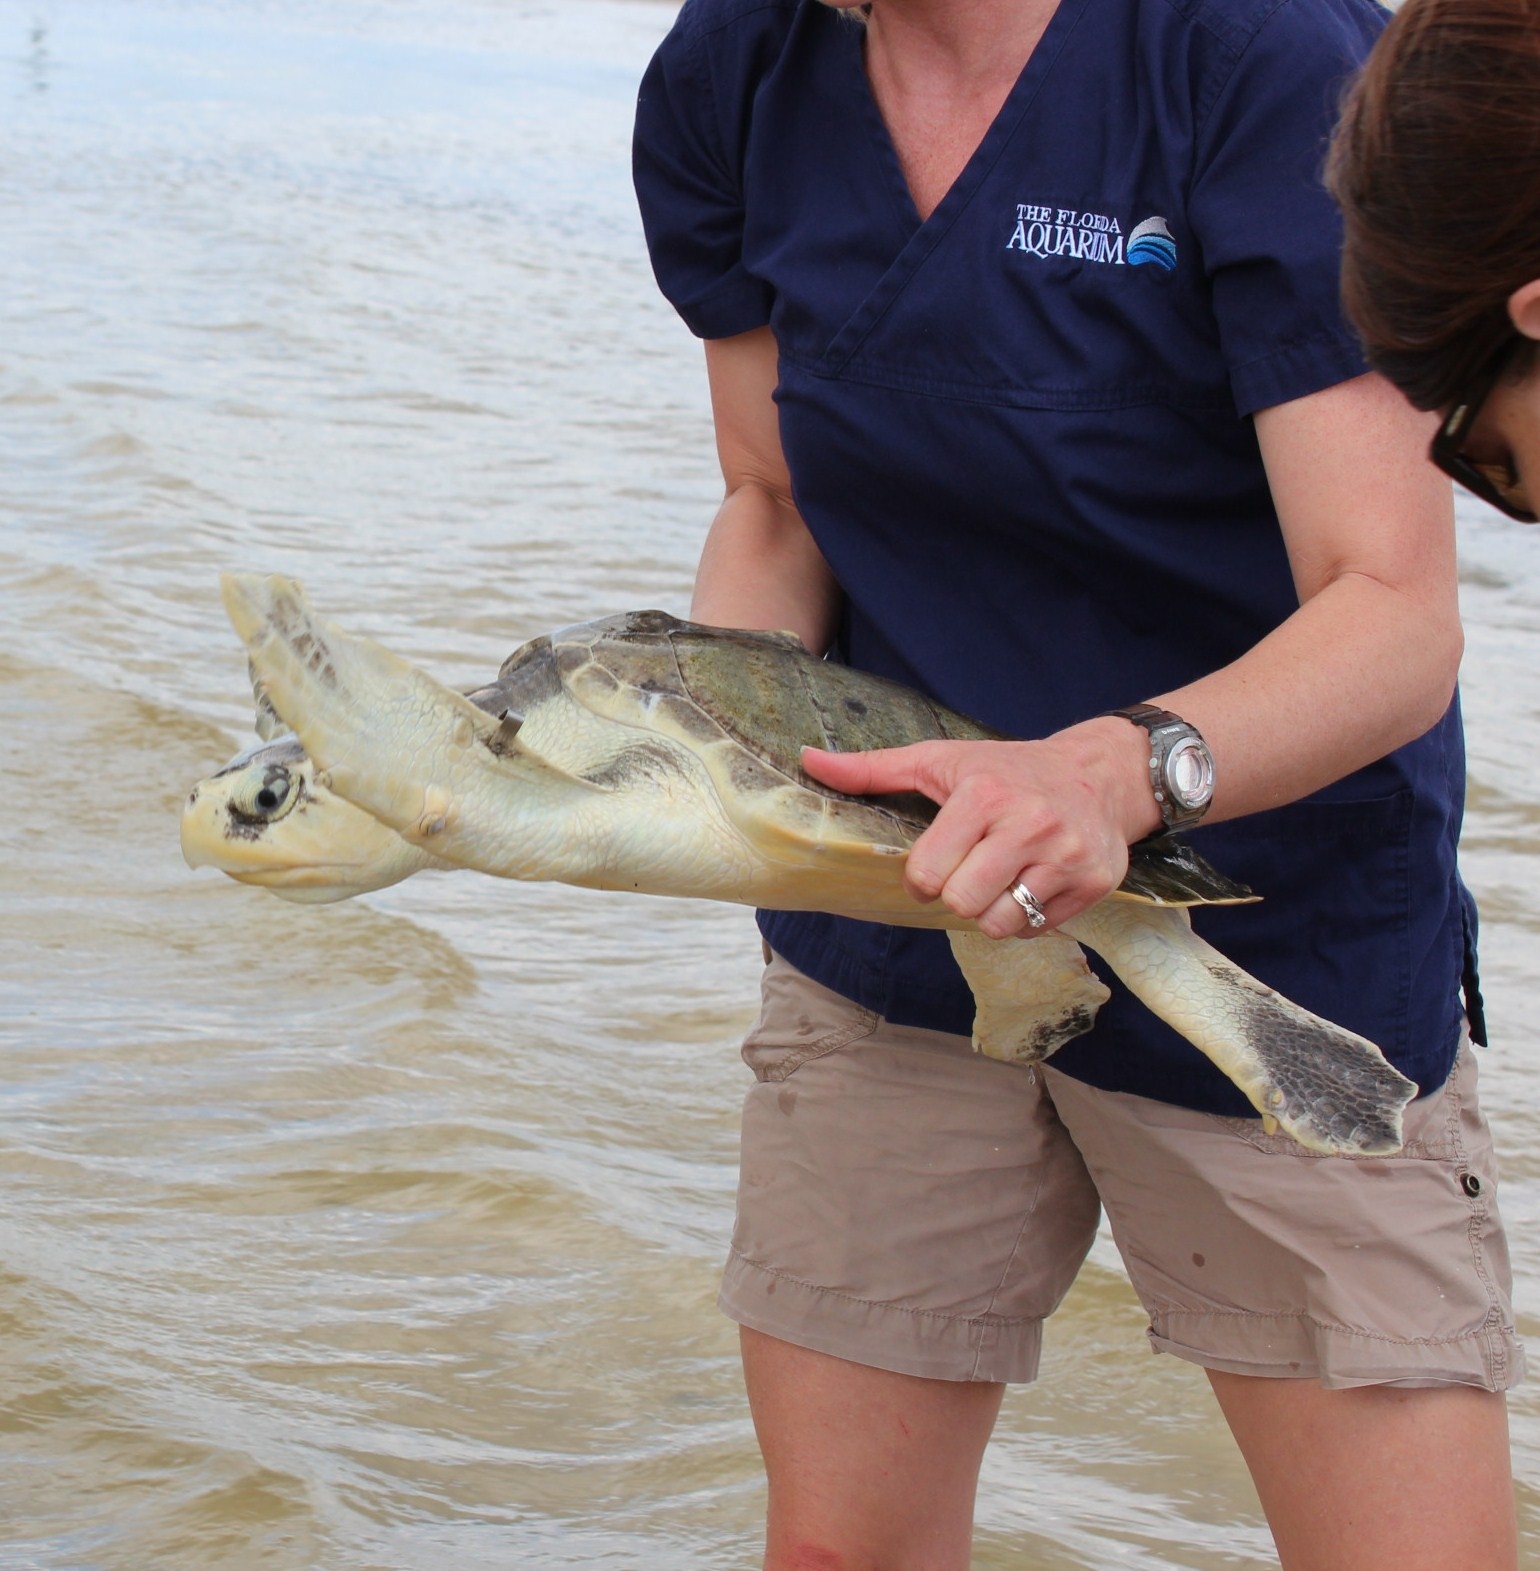 The Florida Aquarium’s Center for Conservation combines research and rehabilitation programs to successfully rescue and release injured sea turtles and river otters